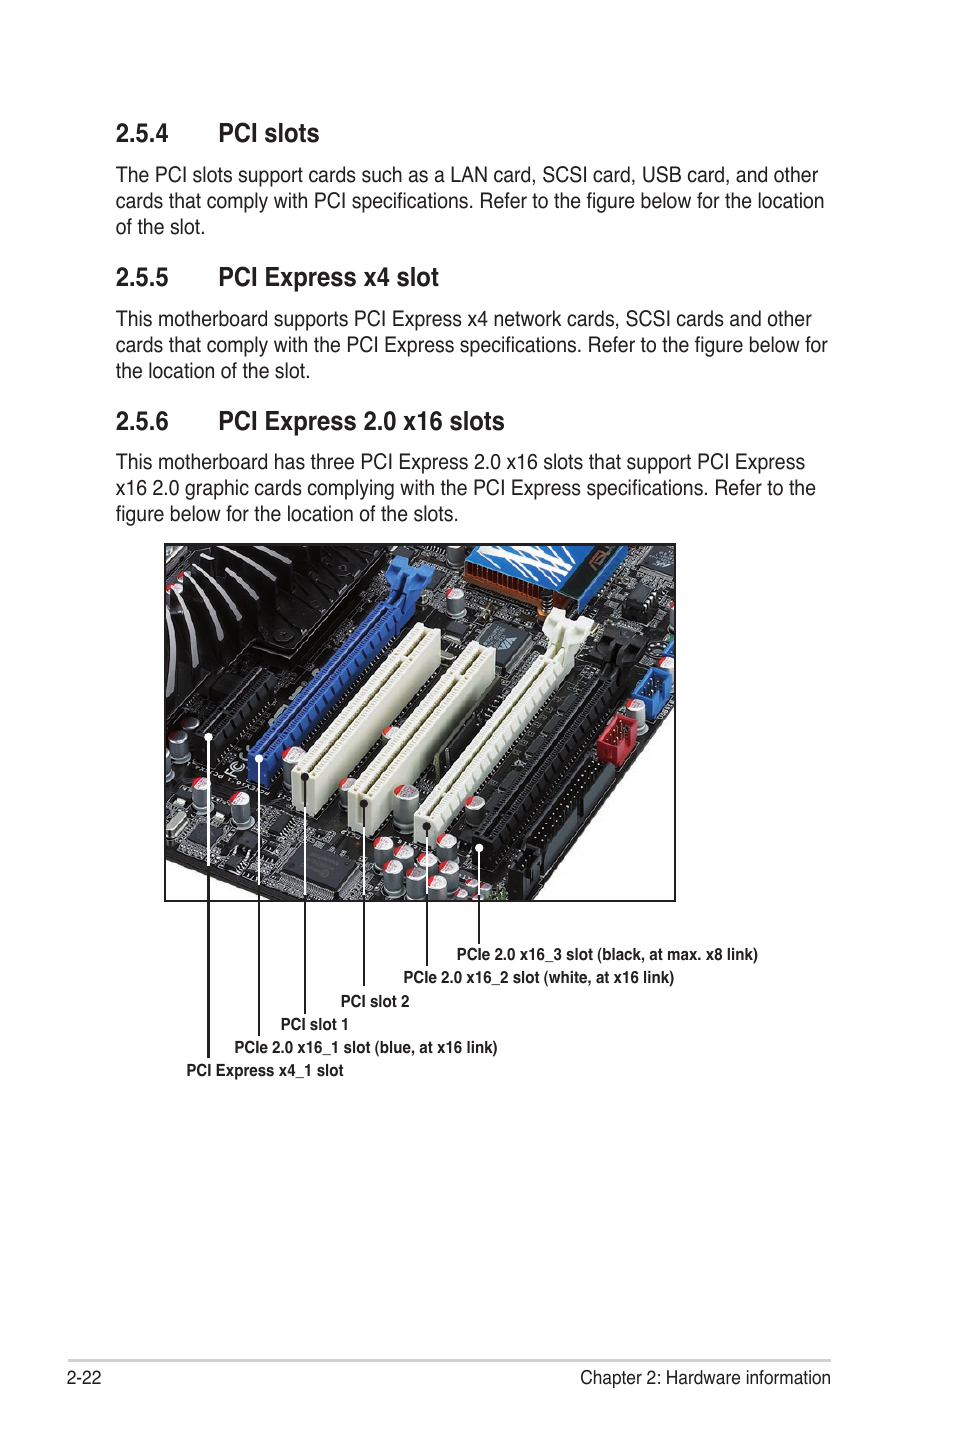 4 pci slots, 5 pci express x4 slot, 6 pci express 2.0 x16 slots | Asus P6T  Deluxe V2 User Manual | Page 48 / 182 | Original mode